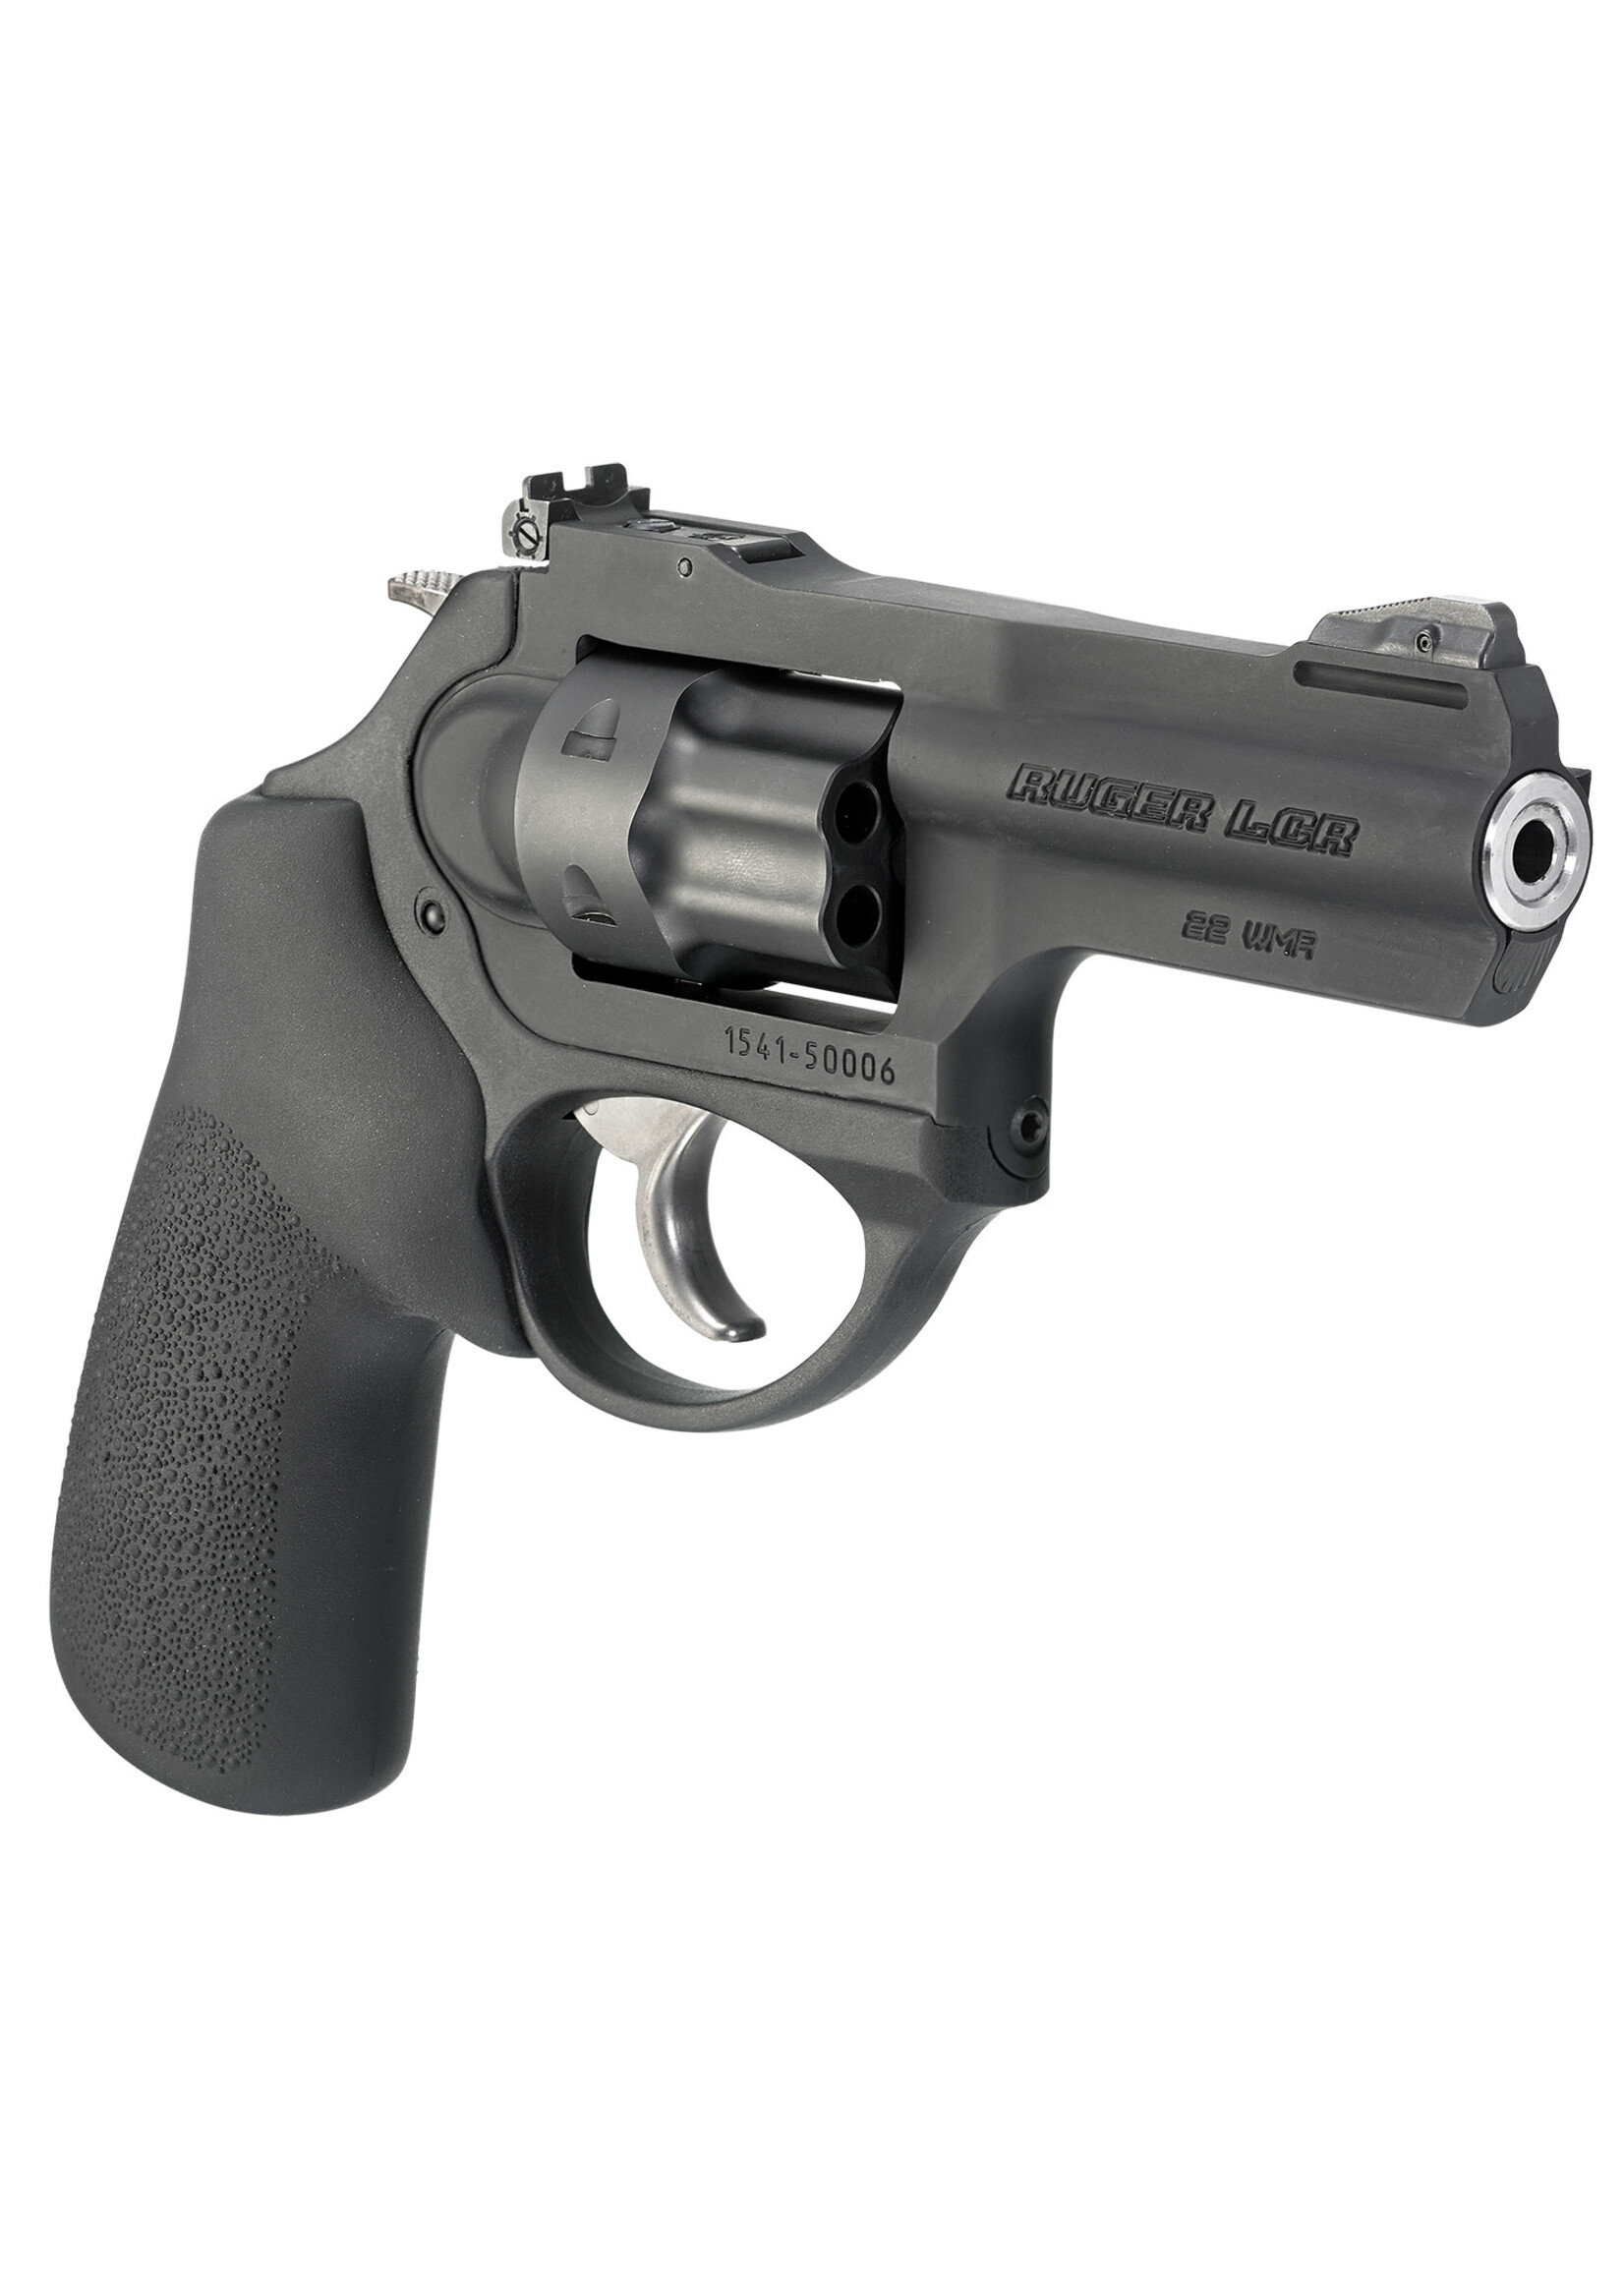 Ruger Ruger, LCRx, Double Action, Revolver, Small Frame, 22 WMR, 3" Barrel, Stainless Steel, Matte Finish, Black, Hogue Tamer Monogrip, Adjustable Black Blade Rear & Replaceable Pinned Ramp Front Sight, 6 Rounds